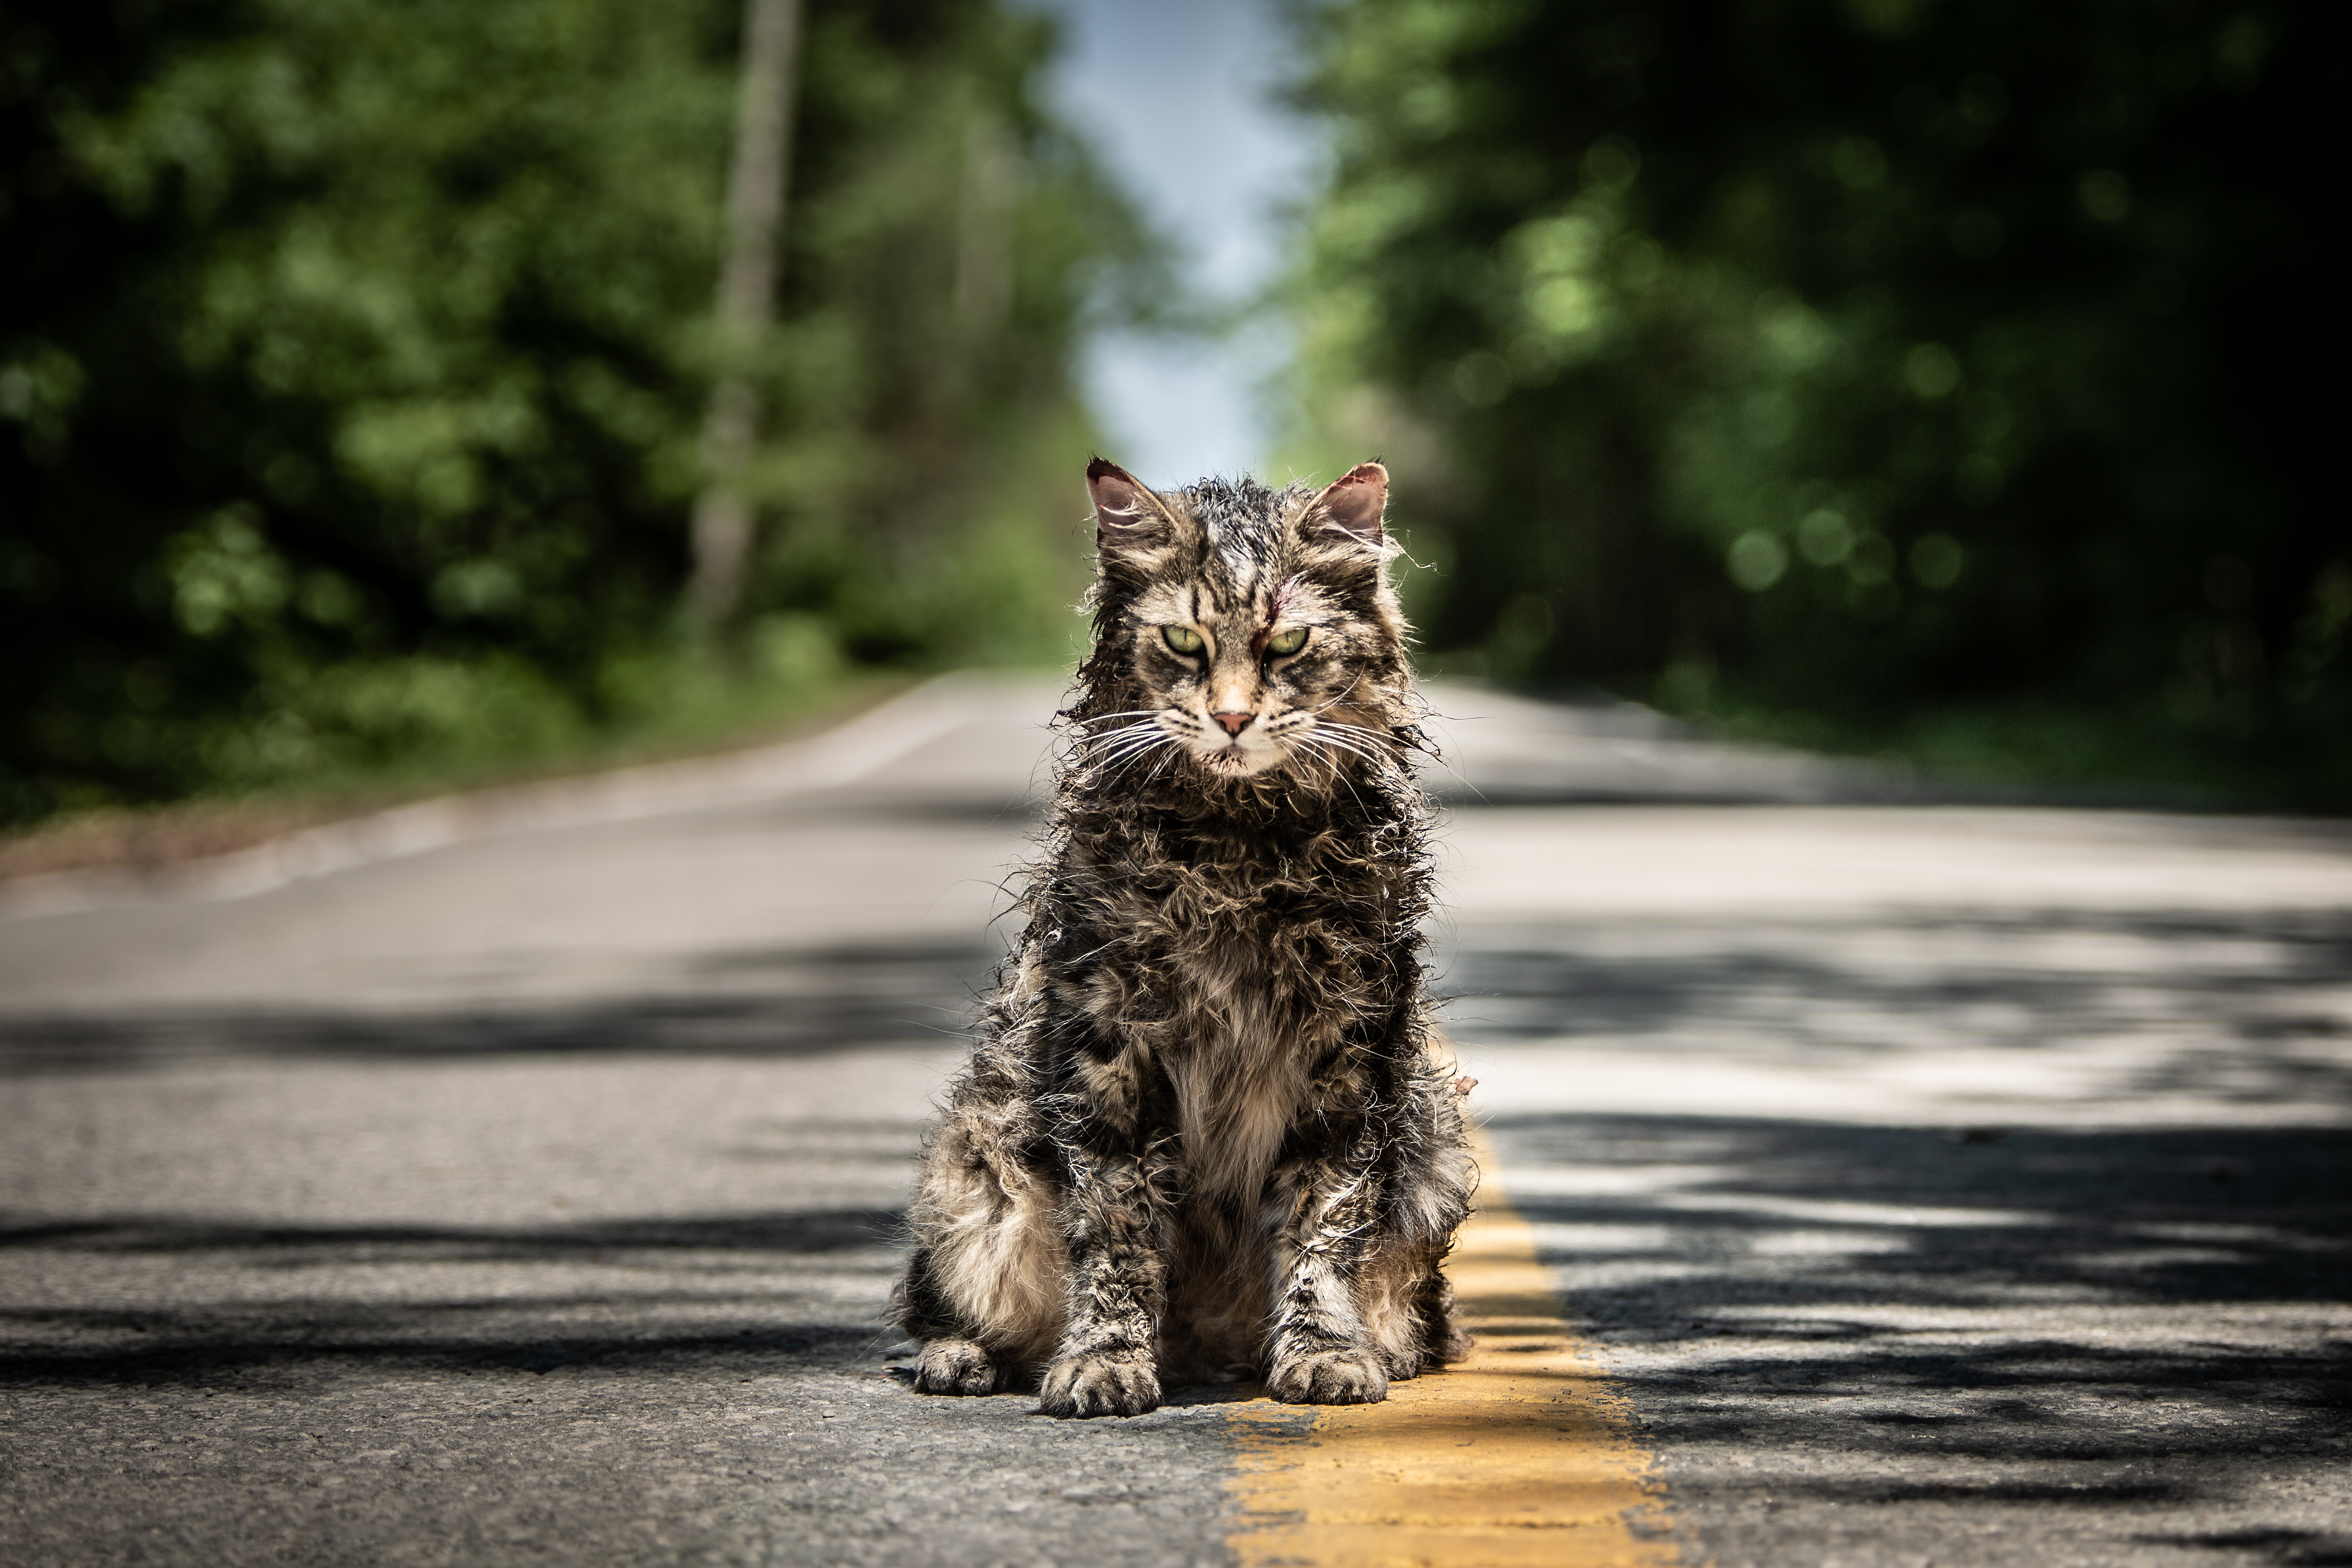 Pet Sematary: A welcome resurrection